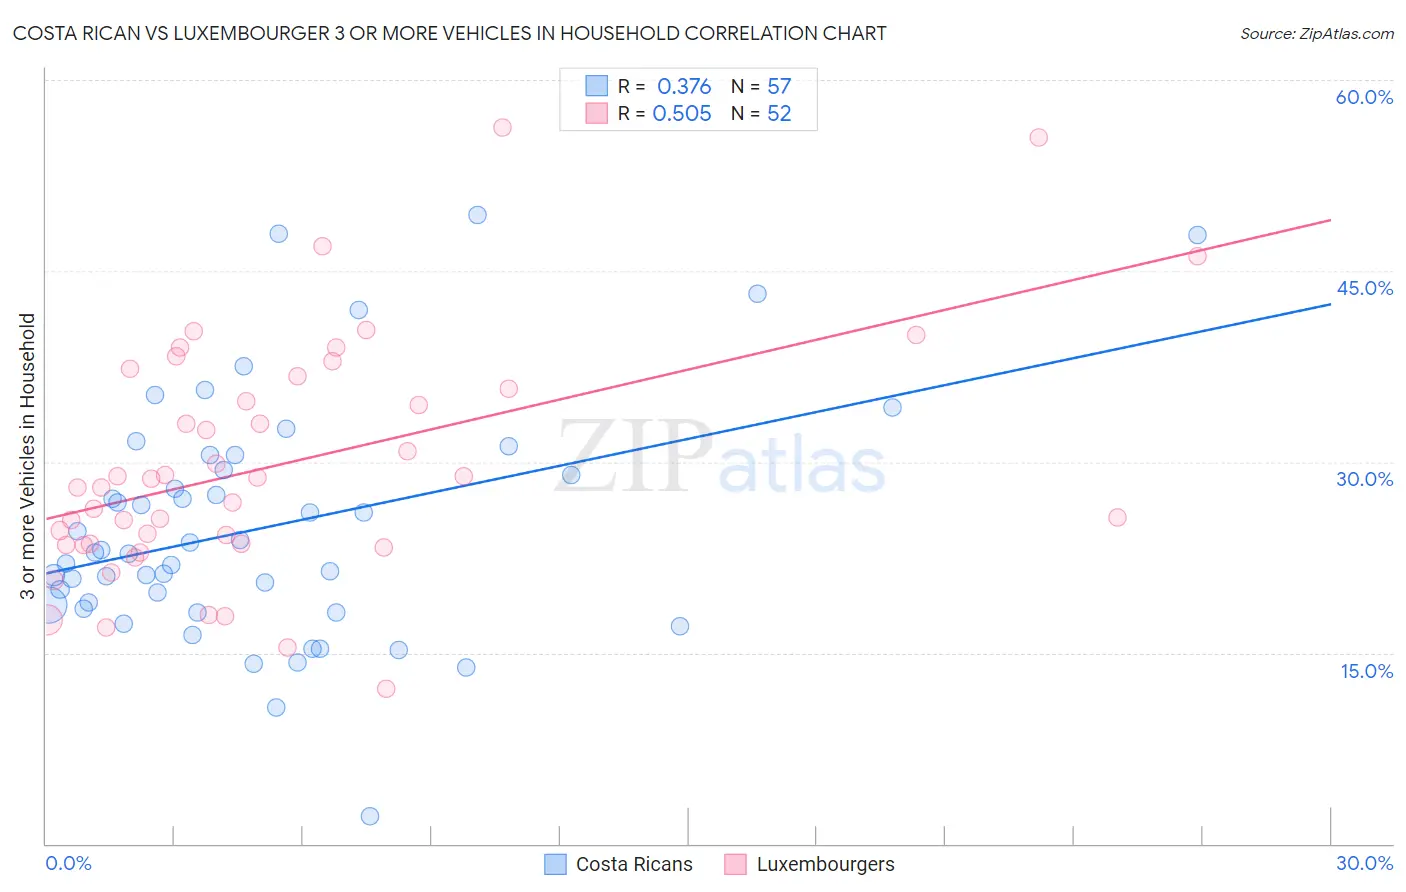 Costa Rican vs Luxembourger 3 or more Vehicles in Household